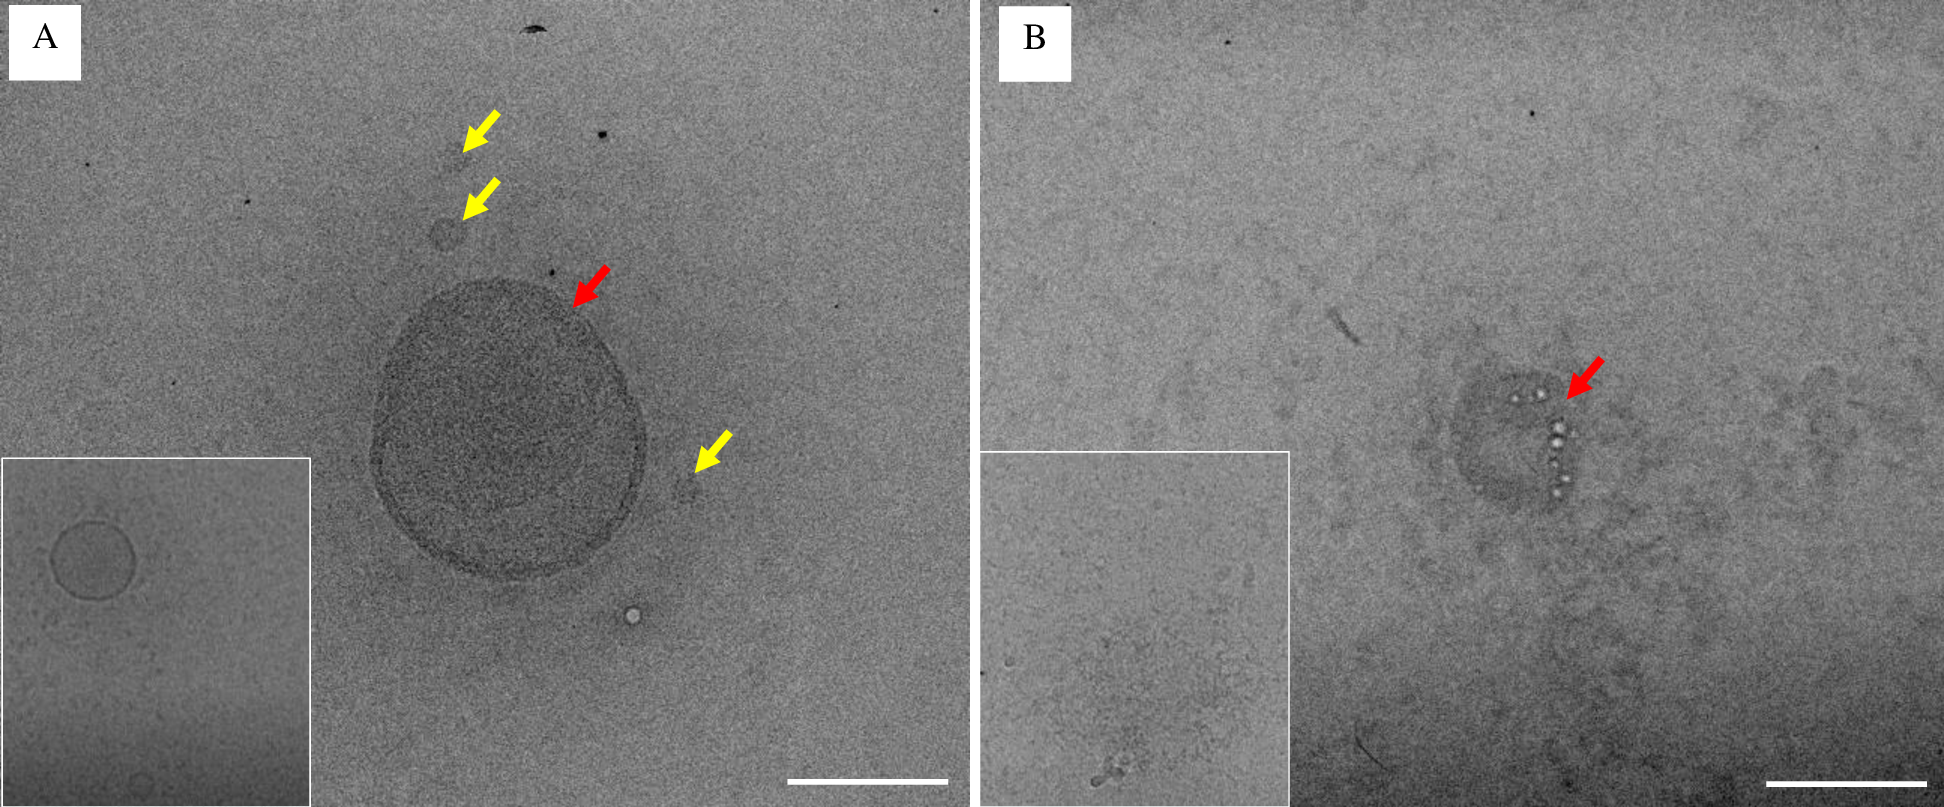 Effect of vinegar on SARS-CoV-2 viral particles by transmission electron microscope (TEM). (A-B) Representative TEM images. (A) The untreated cells, water (- vinegar) SARS-CoV-2 viral particles shows morphodiagnostic features of family Coronaviridae with morphologically intact structure whereas (B) Cells treated with 6% acetic acid (+ vinegar) SARS-CoV-2 viral particles showing presence of abnormal viral morphodiagnostic with misshapen structure with fewer viral particles, and disorganized virion structure. Scale bar = A-B 100nm. Insets are shown from additional images of the same sample.